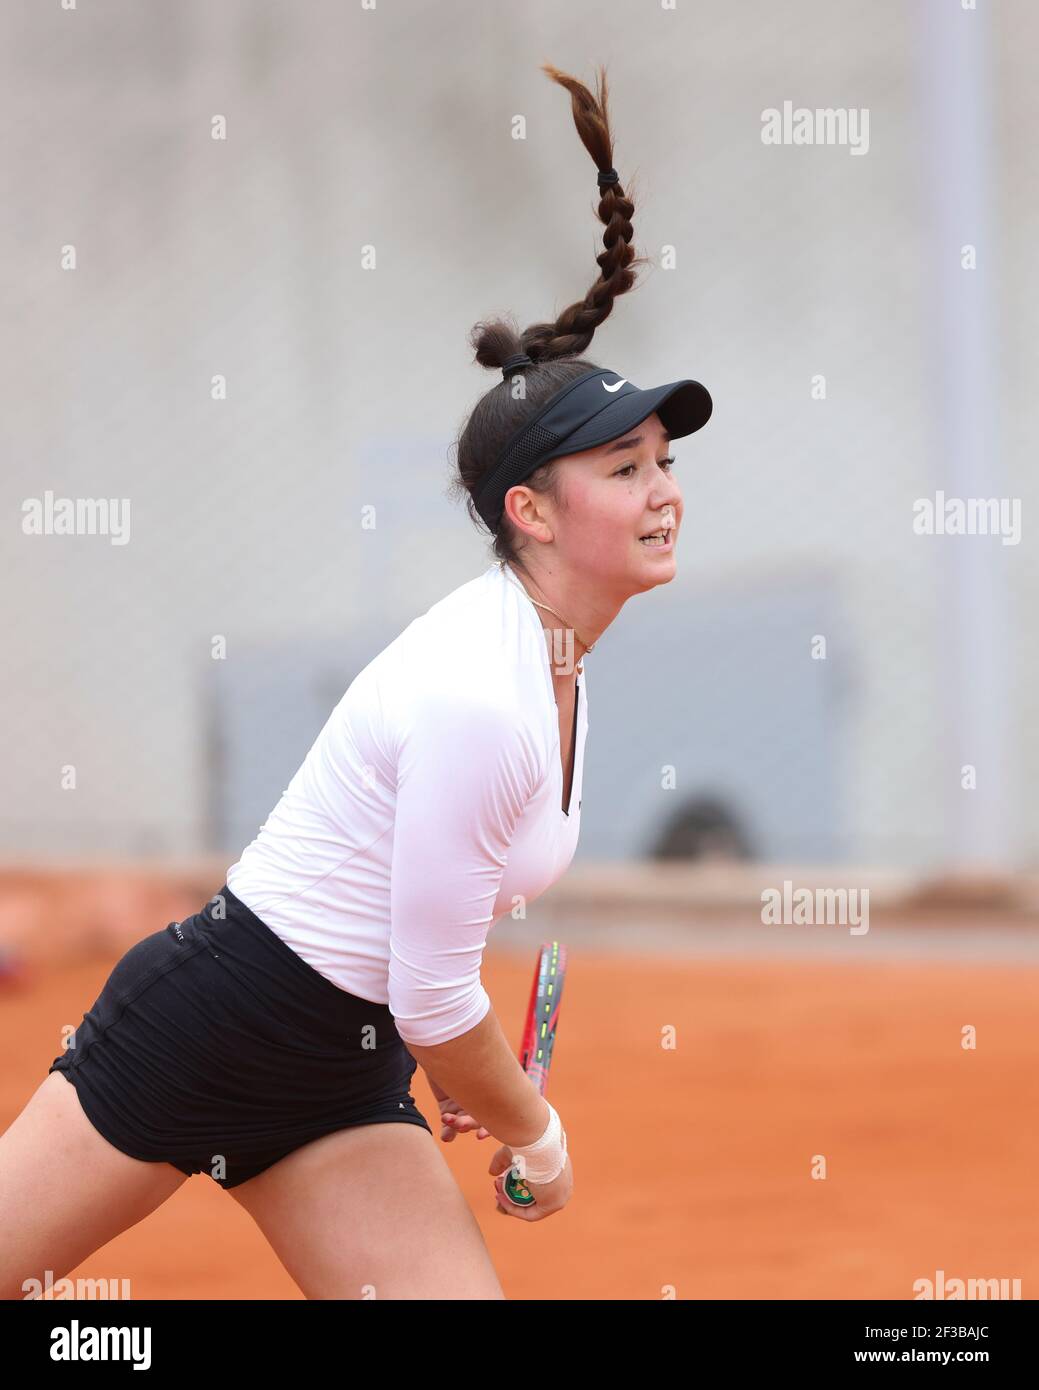 German junior tennis player Eva Lys playing a service shot during French  Open 2020, Paris, France, Europe Stock Photo - Alamy